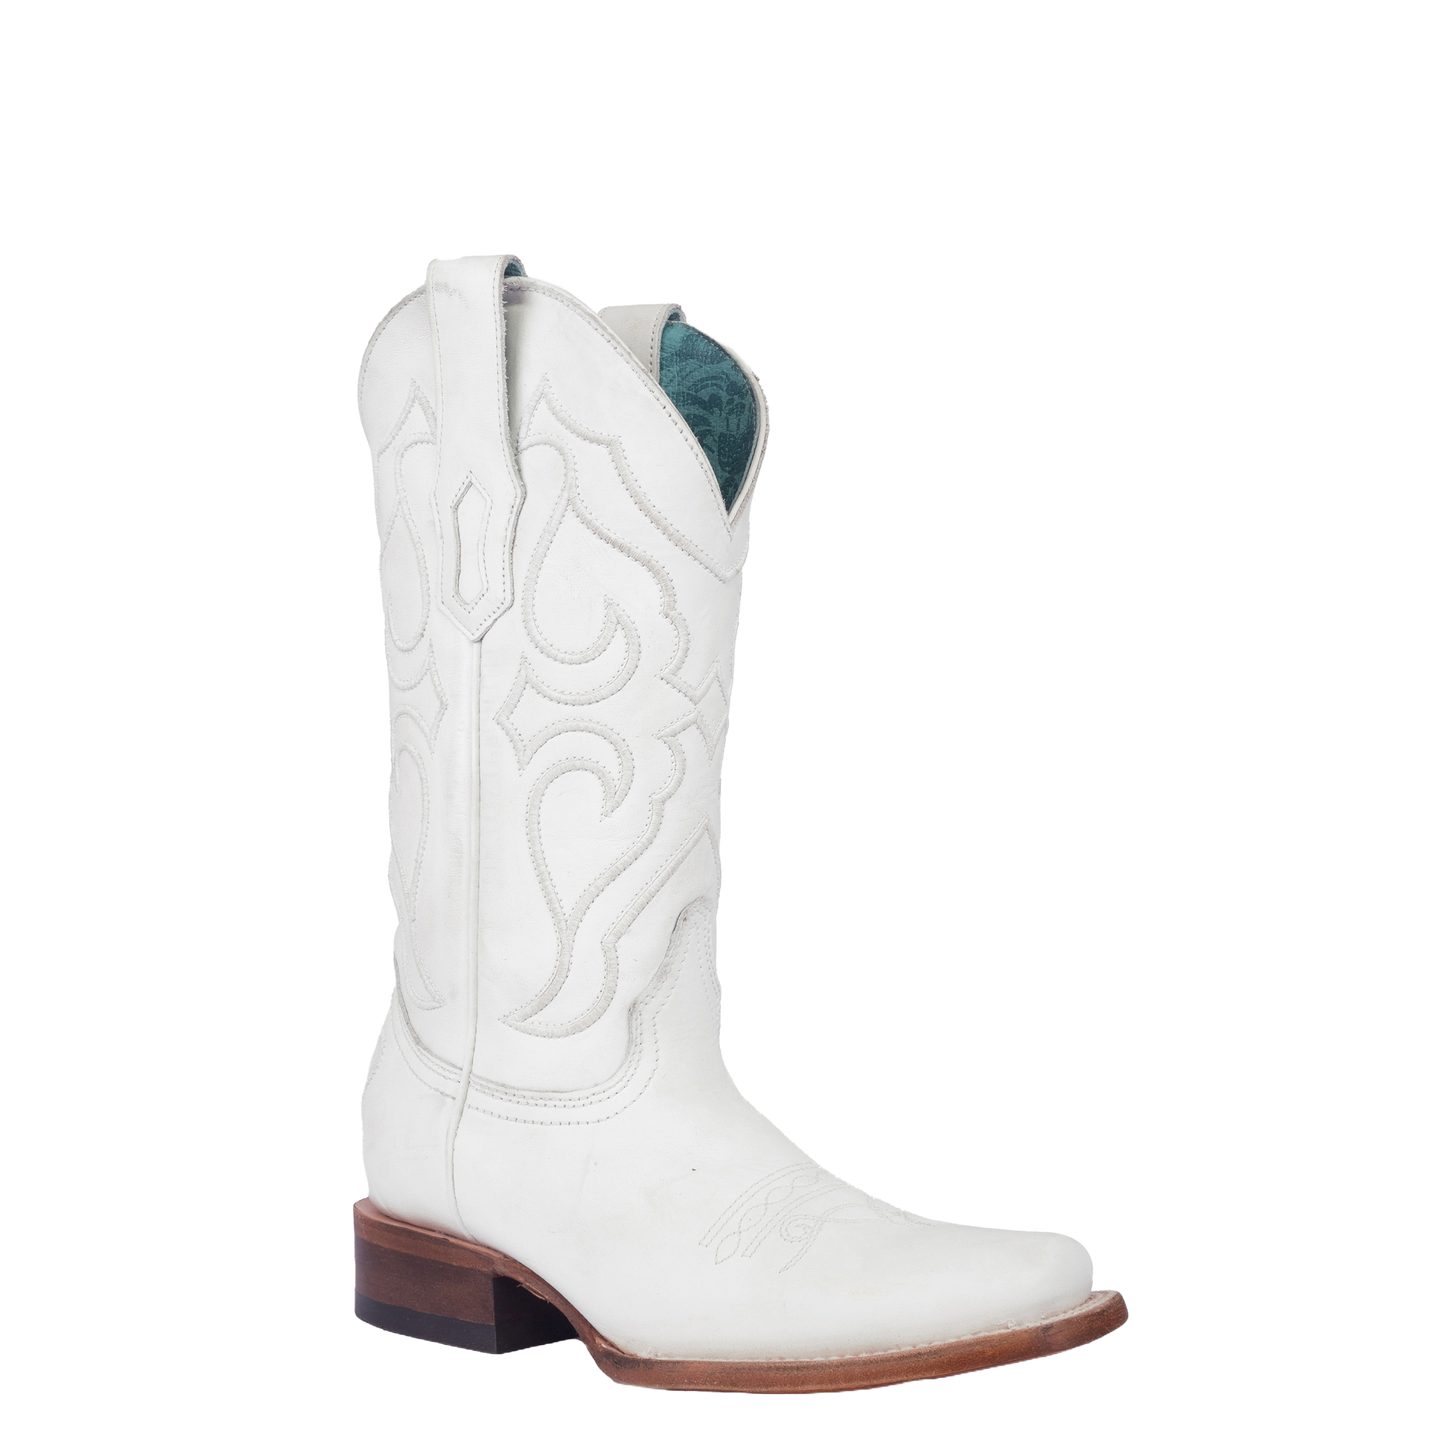 Corral Ladies Full White Embroidery Square Toe Western Boots Z5183